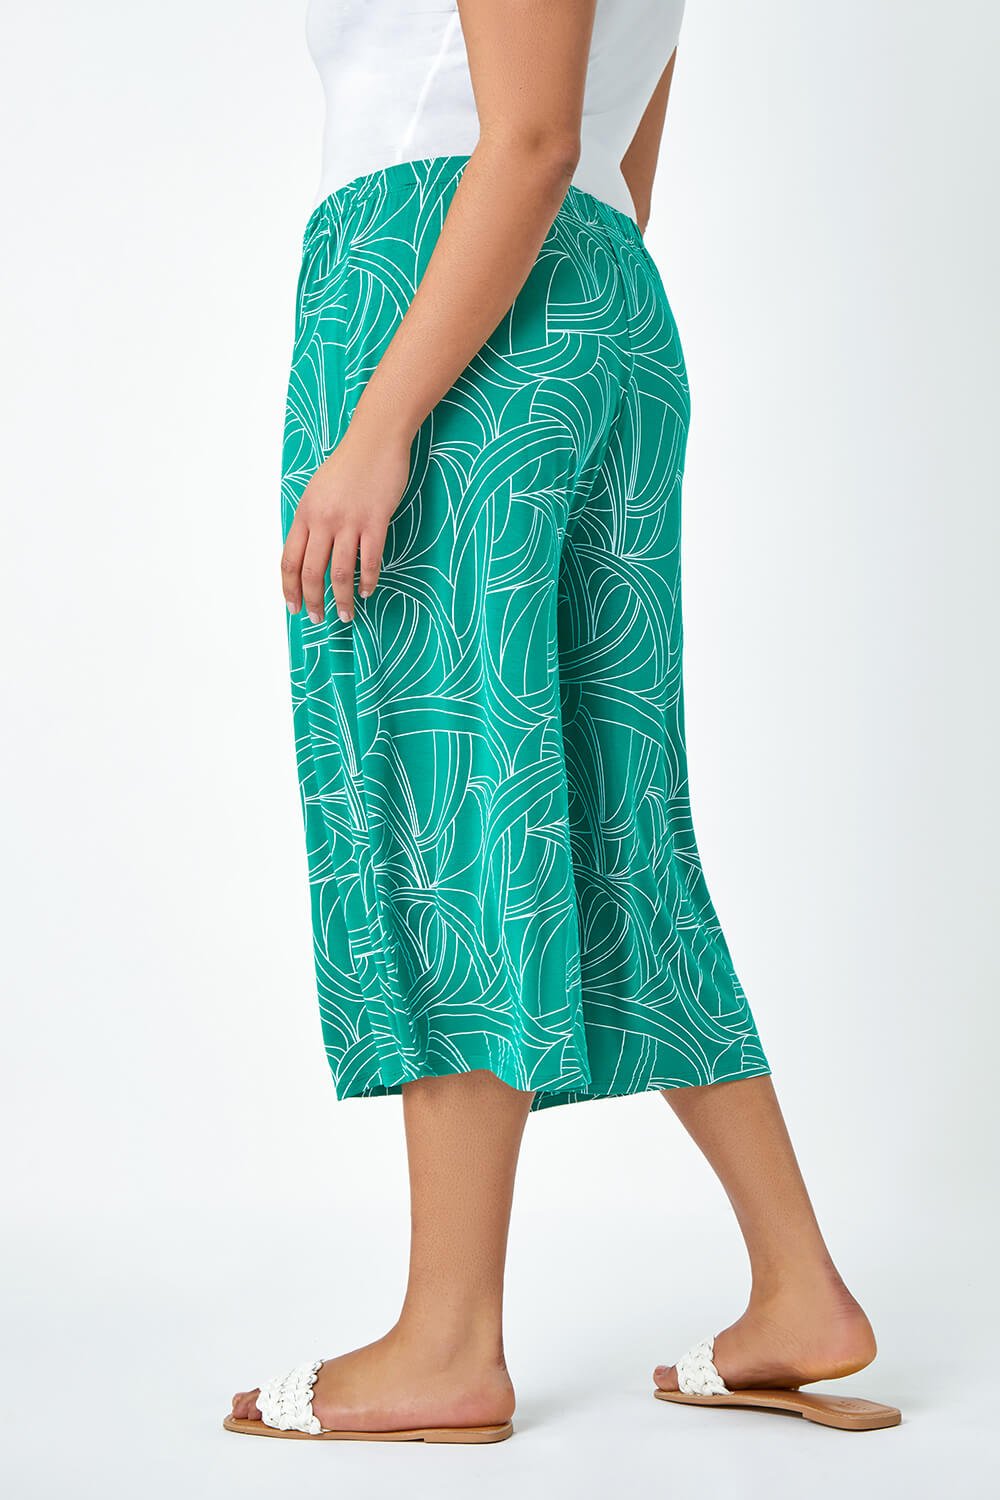 Green Curve Abstract Swirl Stretch Culottes, Image 3 of 5